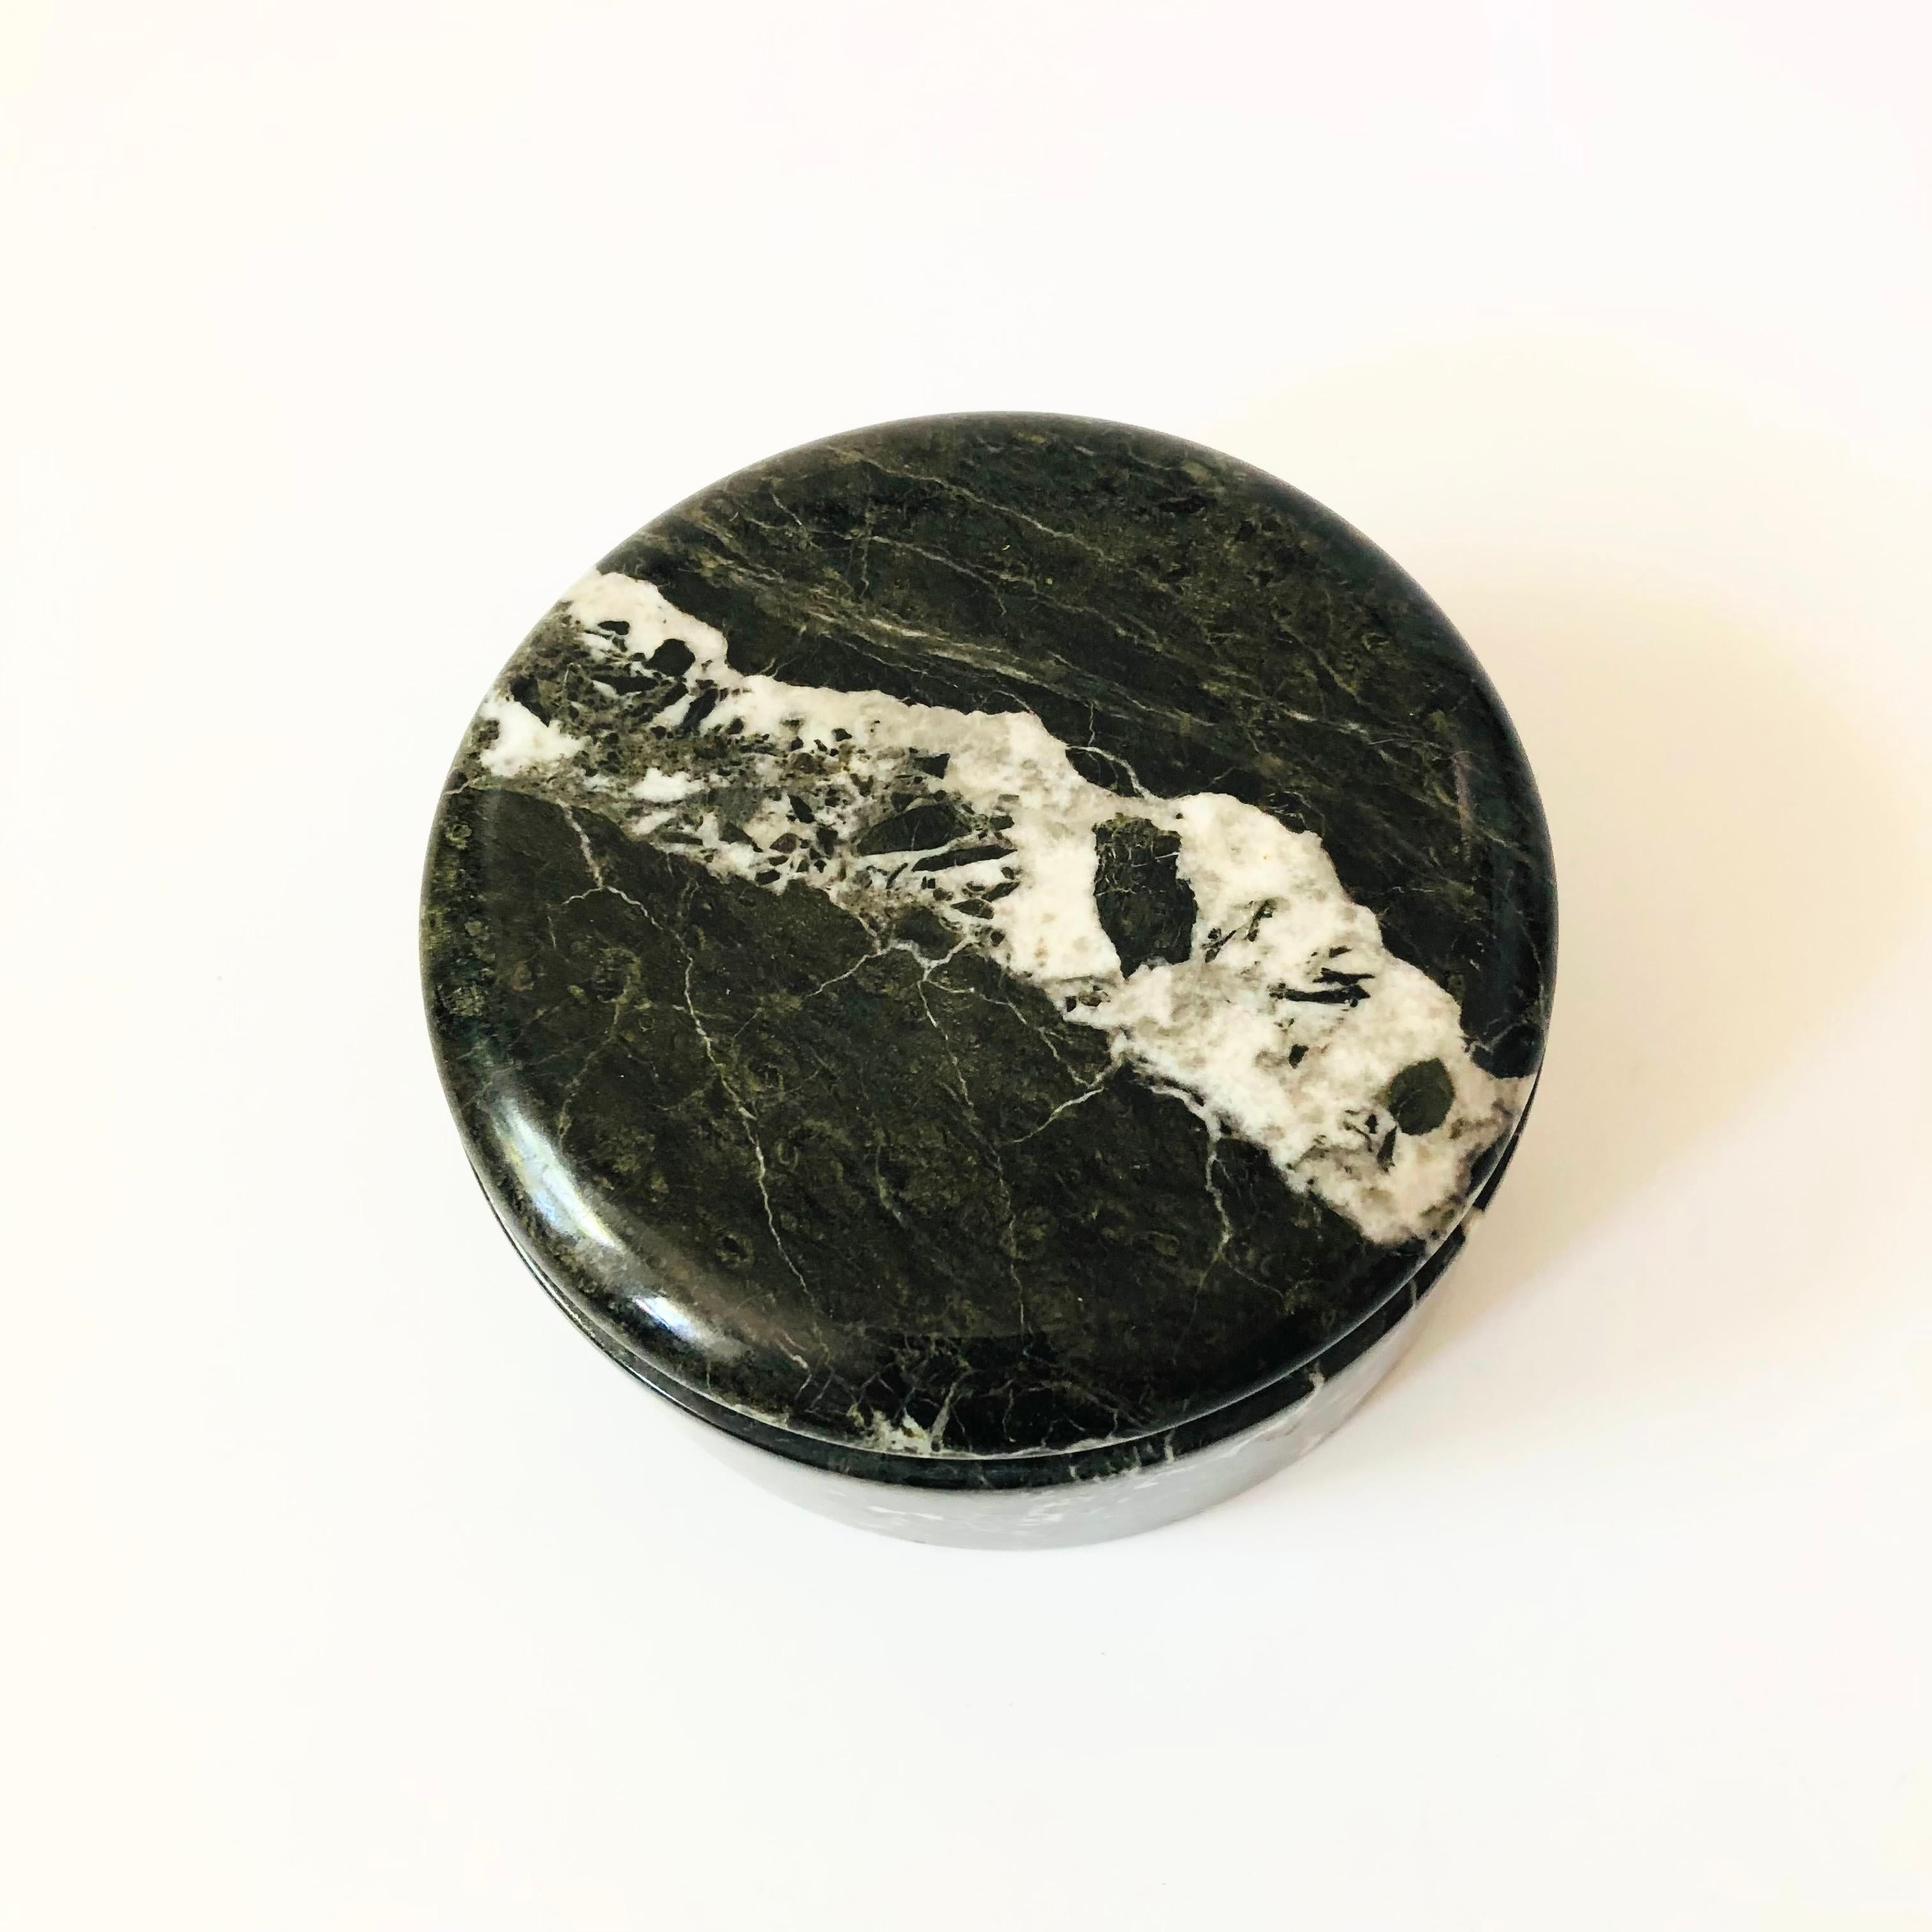 A vintage circular stone box. Beautiful and dramatic natural white veining contrasting against a black base color of the stone.

